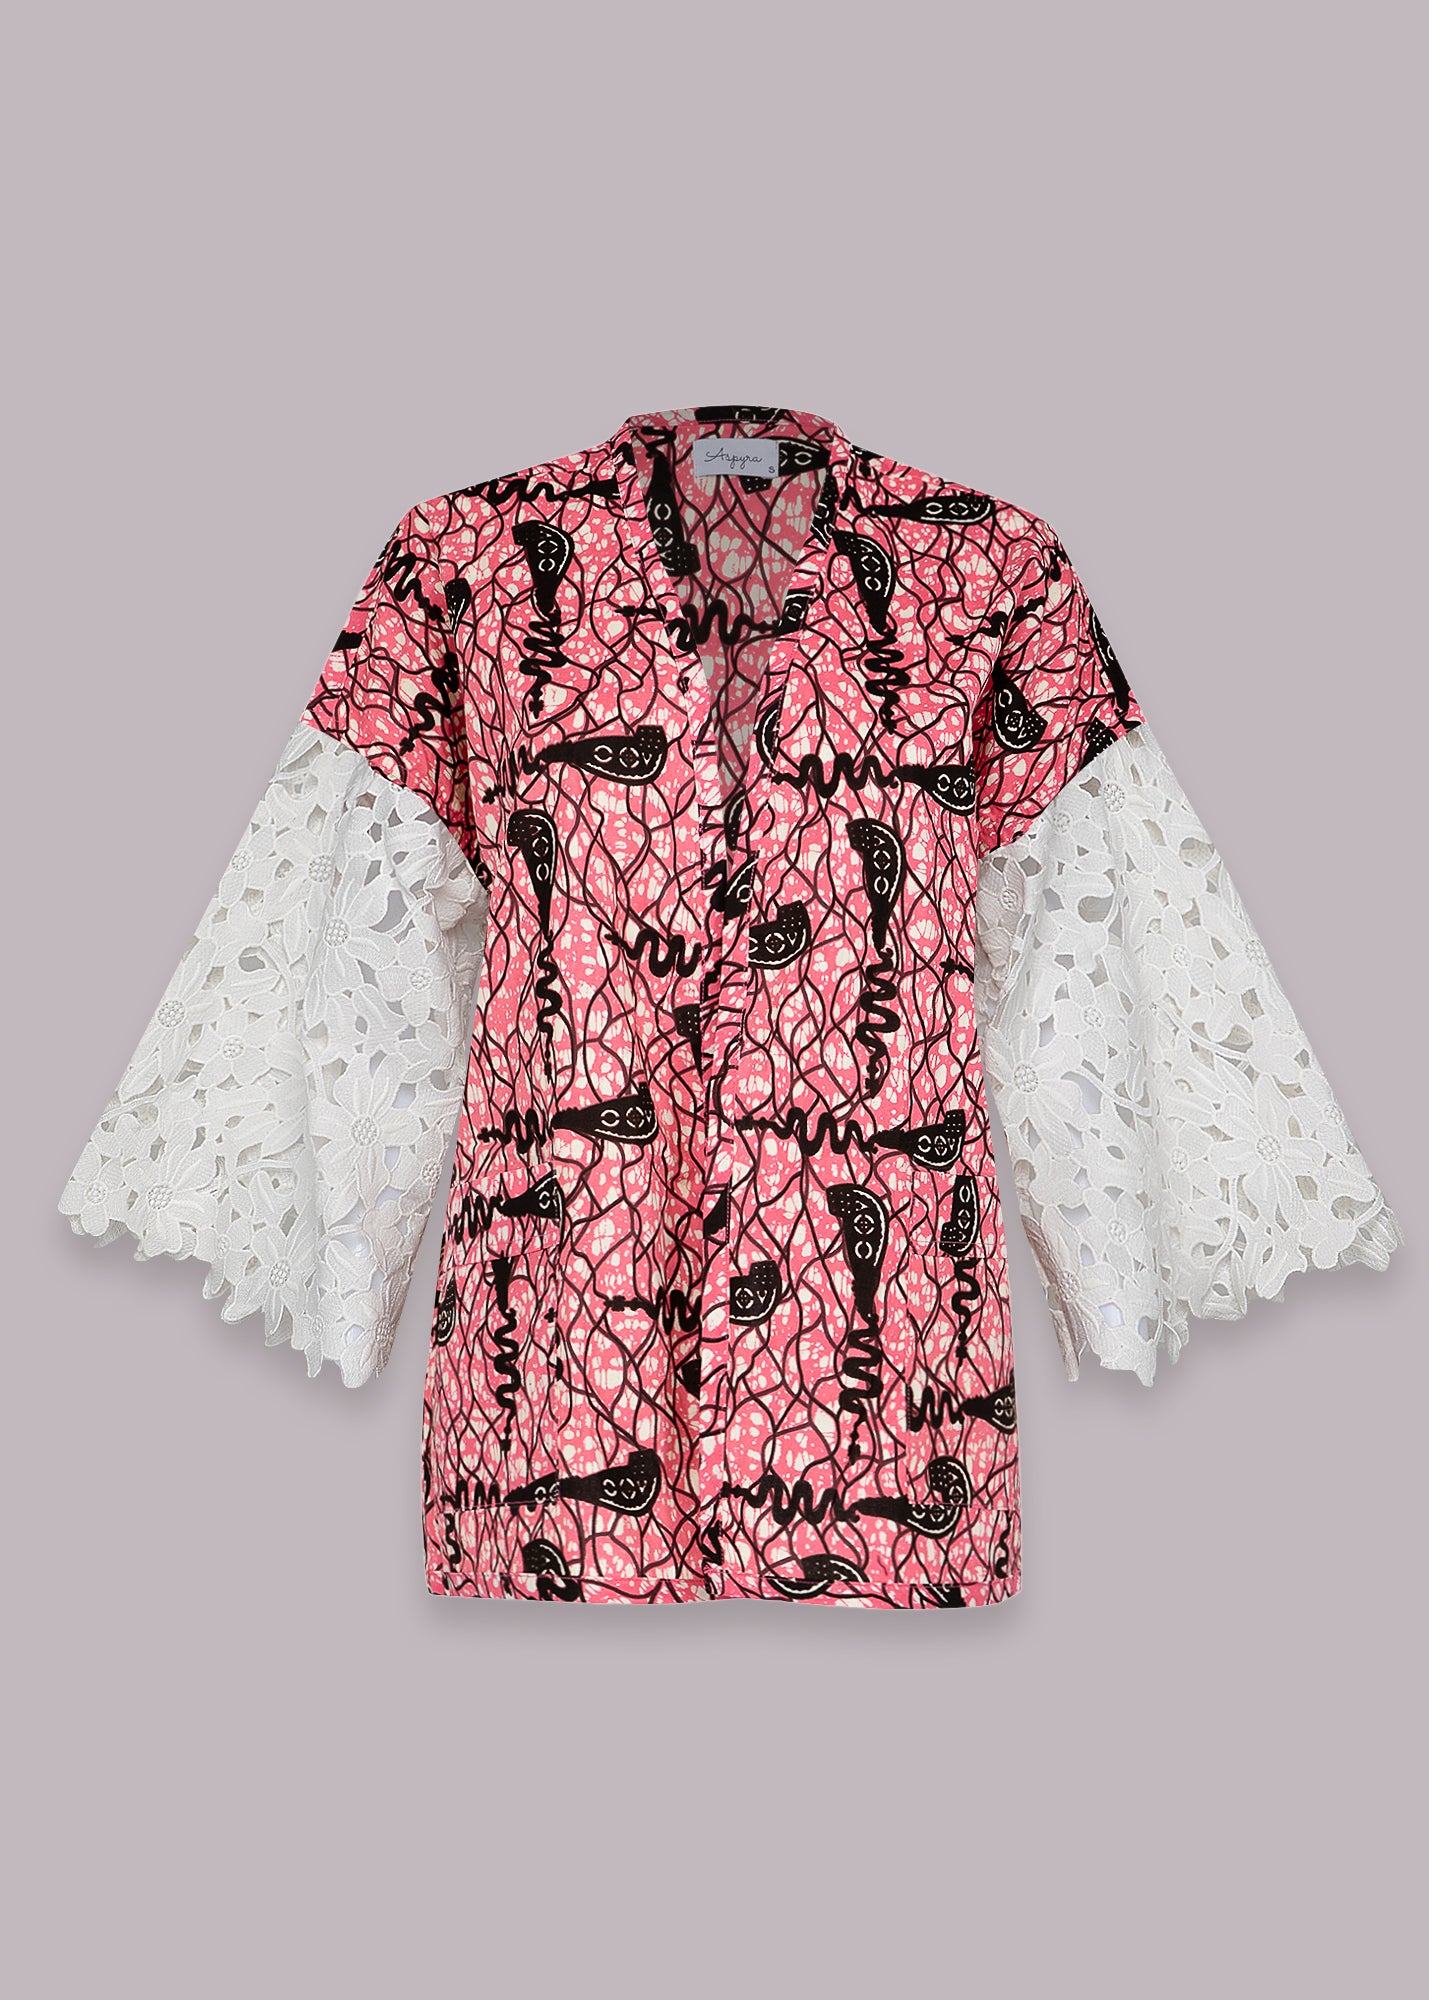 Theme Song in Flamingo Short Kimono Jacket with Lace 2